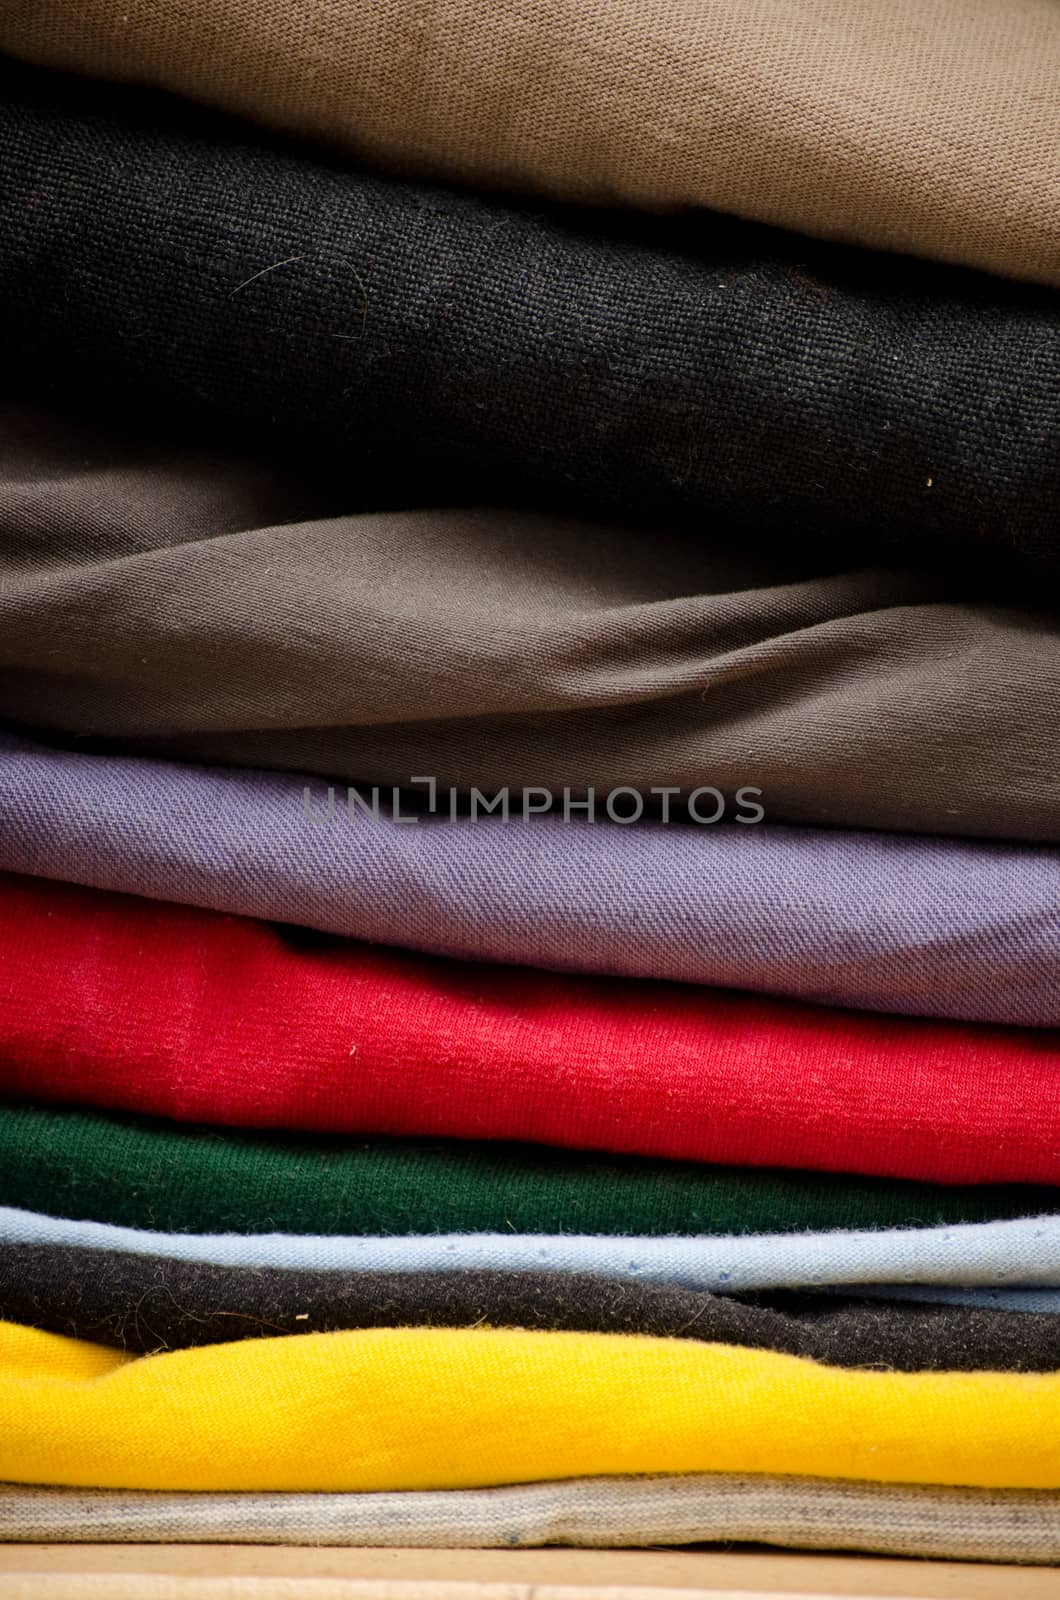 stack of clothes